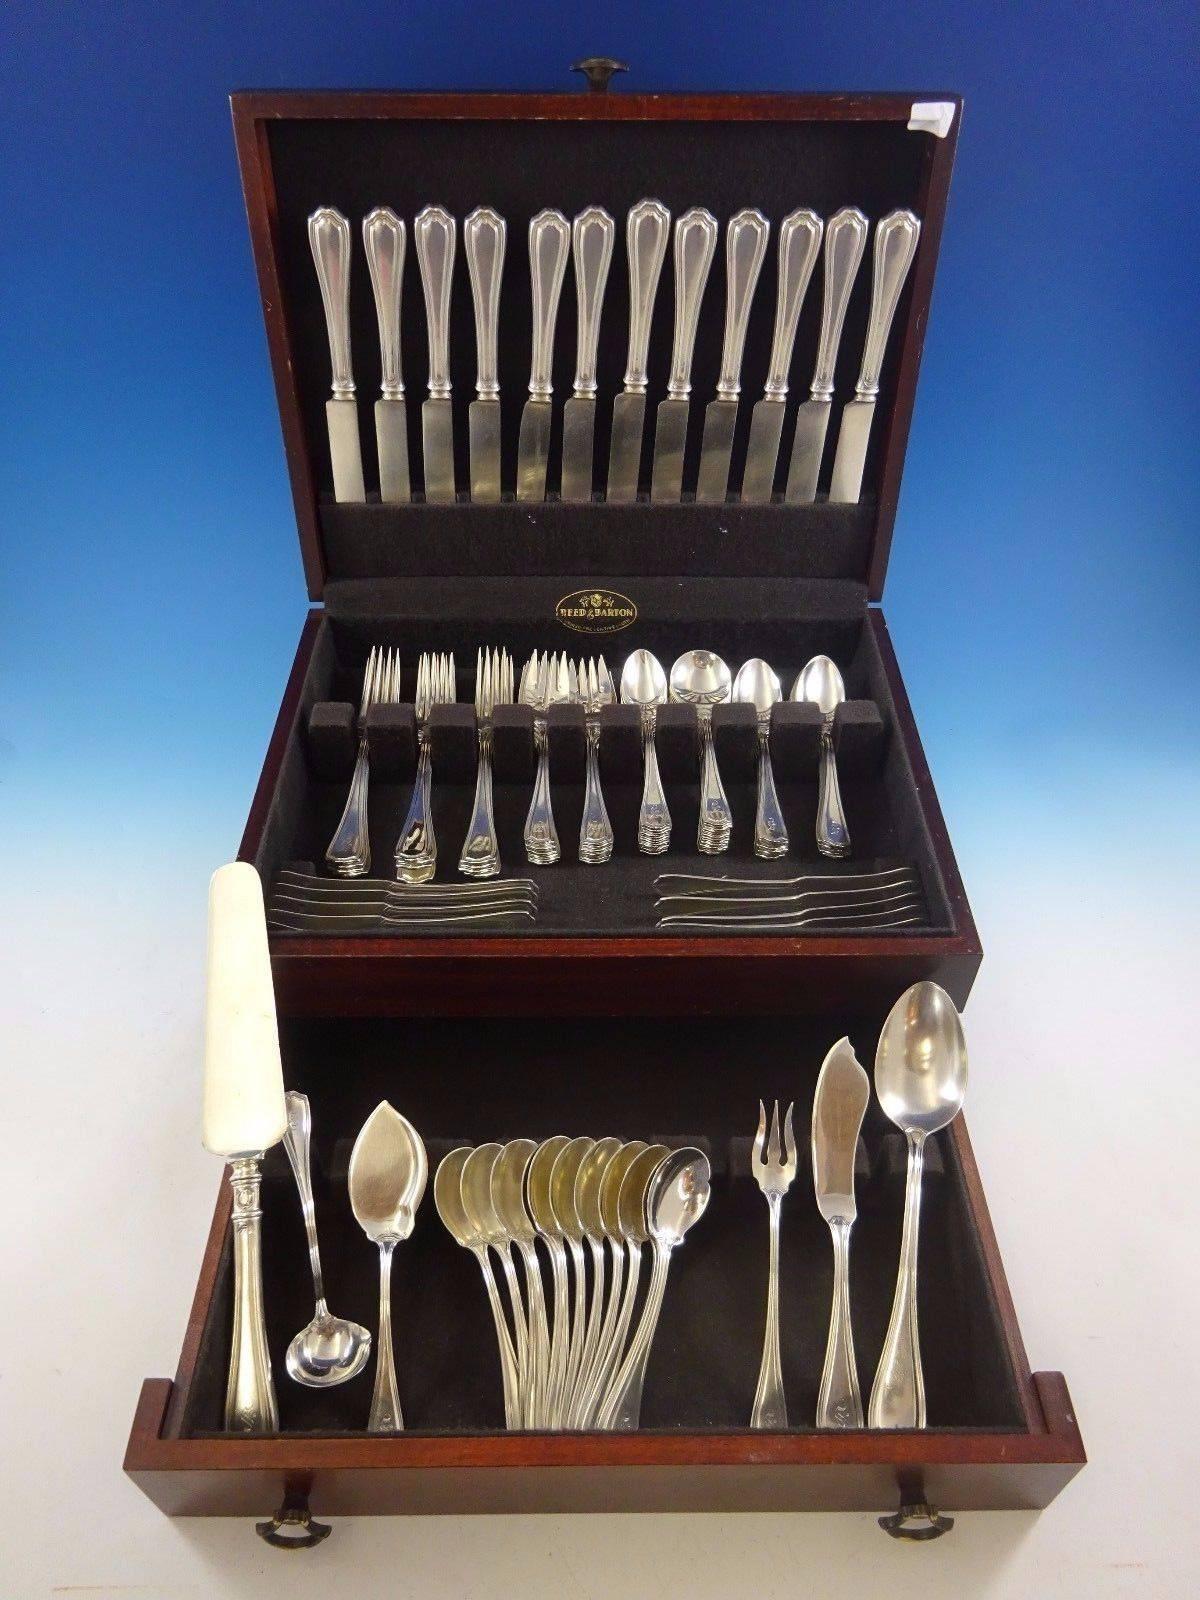 Large Hepplewhite by Reed & Barton sterling silver flatware set - 102 pieces. 

This set includes:

12 knives, 8 3/4